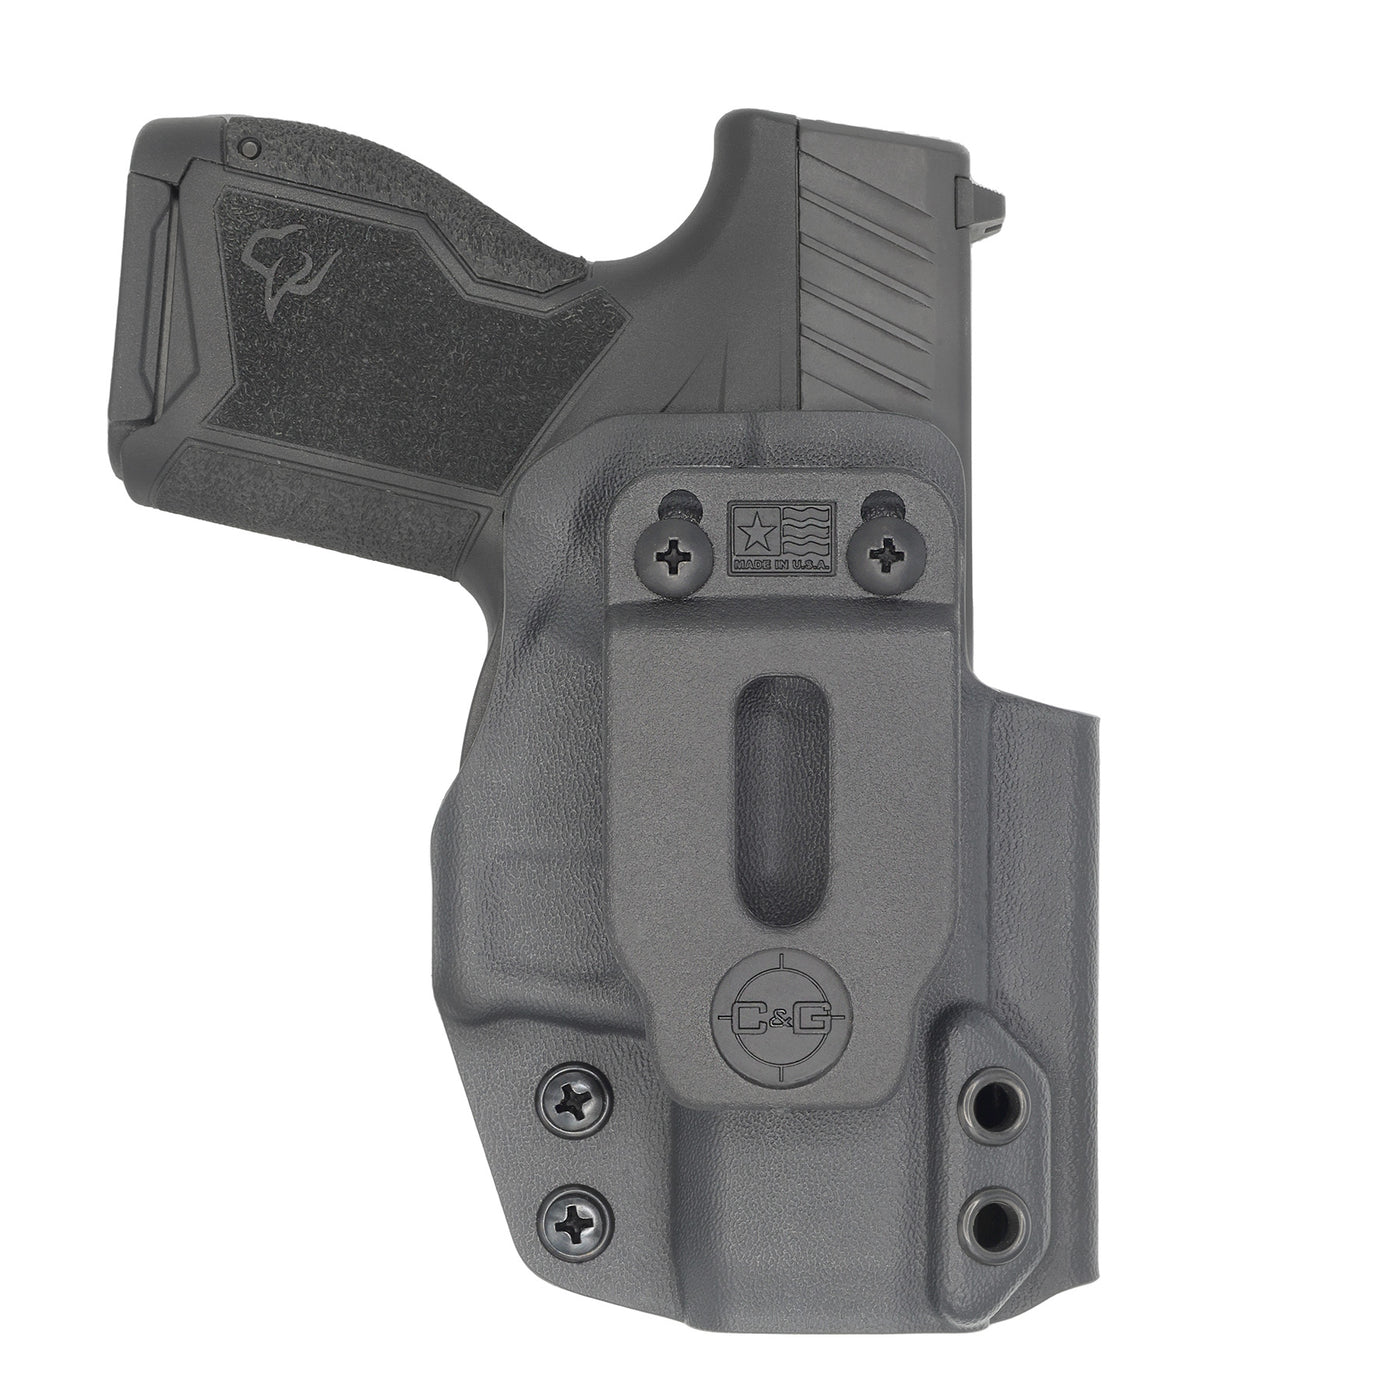 C&G Holsters IWB Quickship Covert Taurus GX4 in holstered position